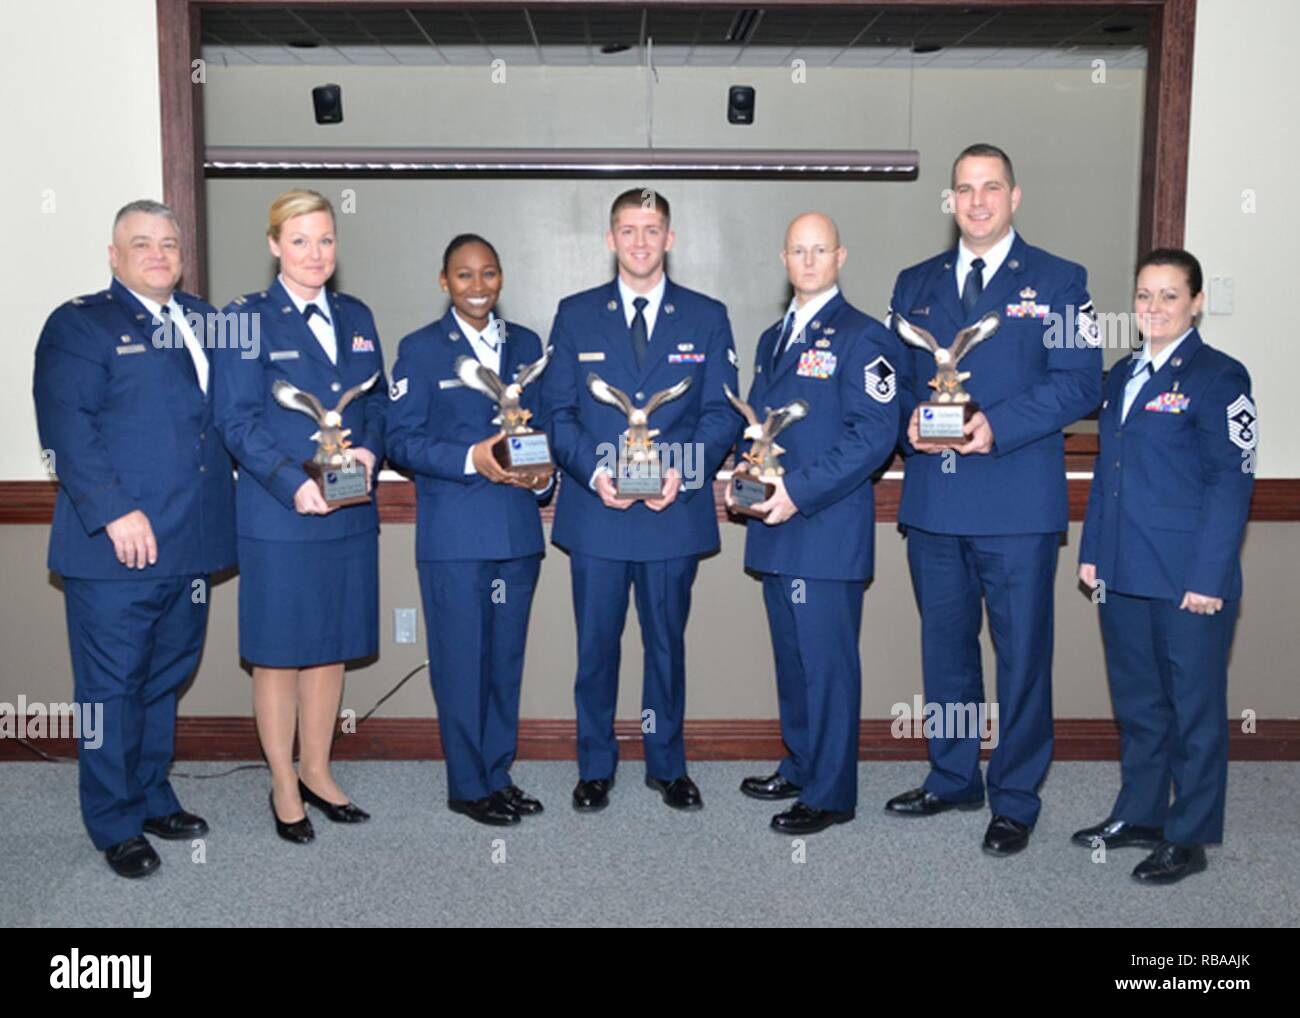 Col. Ken Eaves, 131st Bomb Wing Commander (left) and 131st Command Chief Master Sgt. Jessica Settle (right) recognize winners of the wing’s 2016 Outstanding Airman of the Year awards during the Missouri Air National Guard’s OAY Banquet held at Whiteman Air Force Base, Missouri, Jan. 6. From left to right, winners are: Capt. Amy Cottrell, 131st Medical Group, Company Grade Officer of the Year; Staff Sgt. Heather Campbell, 157th Air Communications Squadron, Noncommissioned Officer of the Year; Senior Airman Travis Hugh, 157th ACOMS, Airman of the Year; Master Sgt. Thomas DuMont Jr., 157th Combat Stock Photo